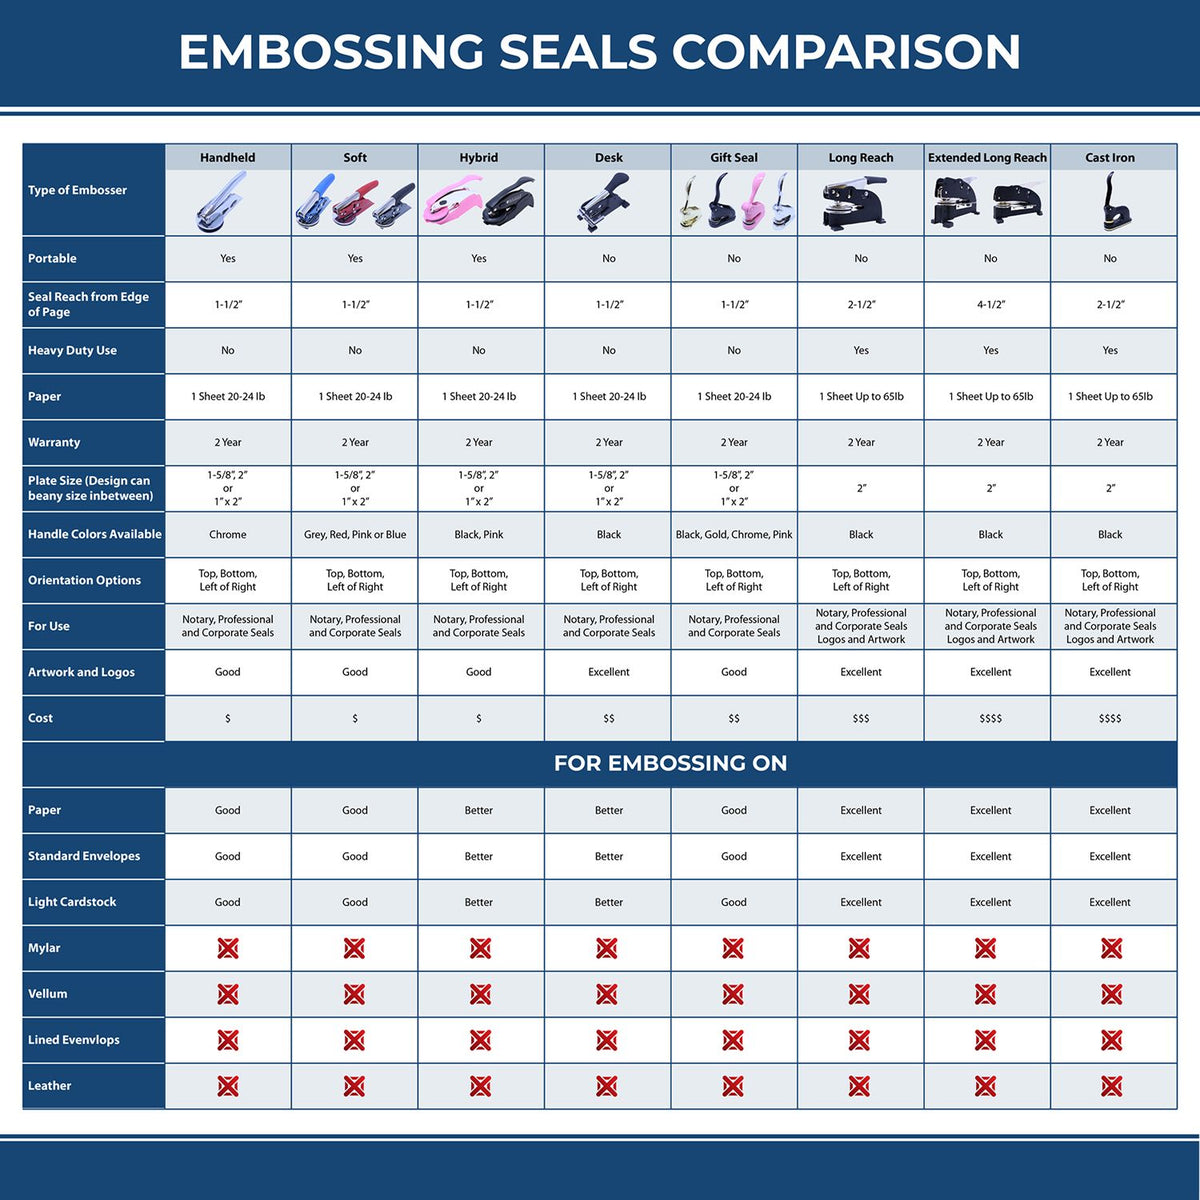 A comparison chart for the different types of mount models available for the Soft Arkansas Professional Engineer Seal.